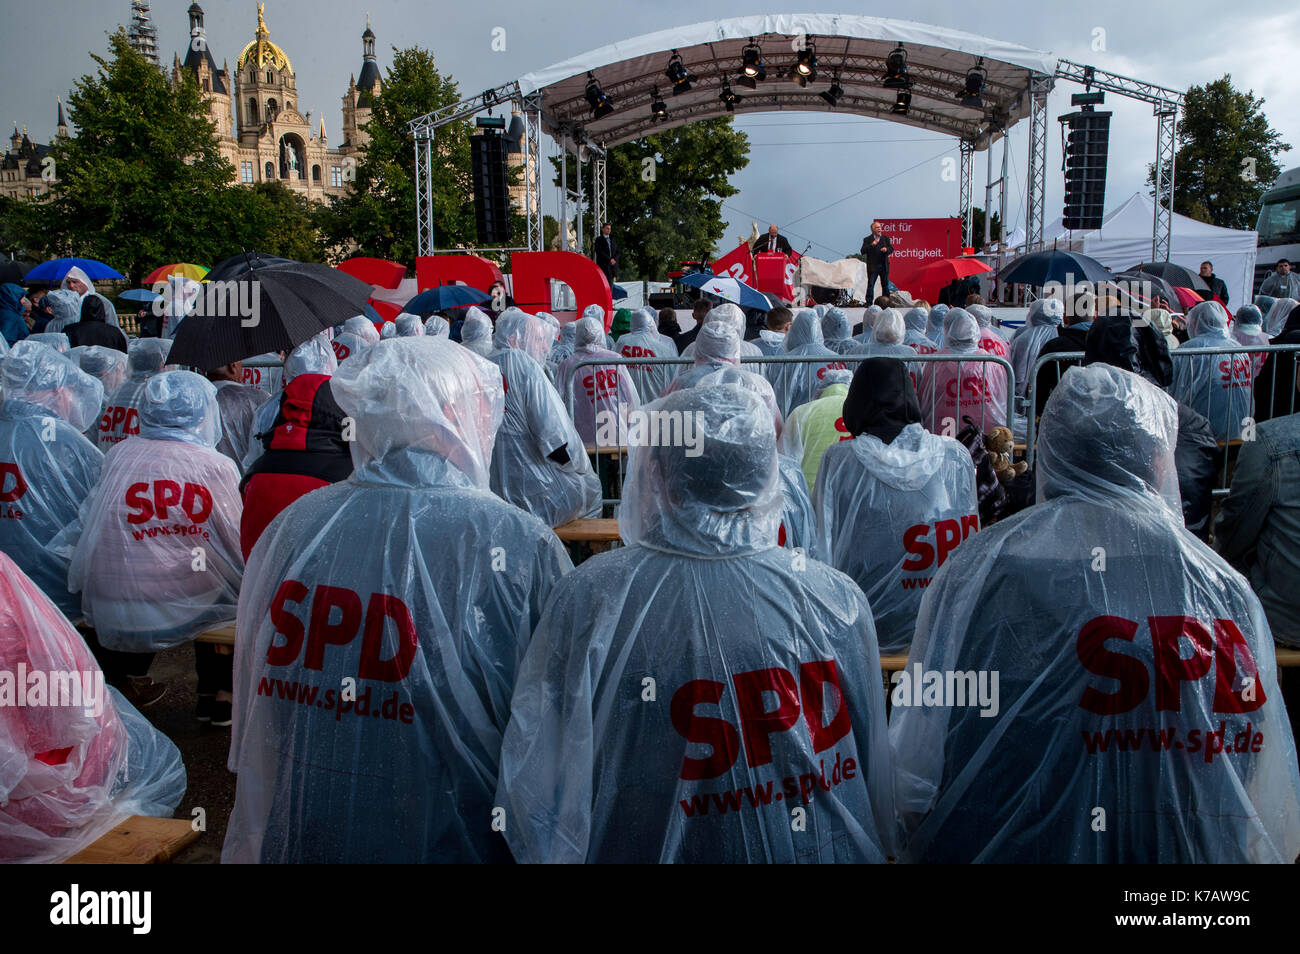 Schwerin, Germany. 15th Sep, 2017. Martin Schulz, candidate for chancellorship from the Social Democratic Party of Germany (SPD), speaking during heavy rainfall at an election campaign event in front of an audience of about 400 people in Schwerin, Germany, 15 September 2017. Photo: Jens Büttner/dpa-Zentralbild/dpa/Alamy Live News Stock Photo